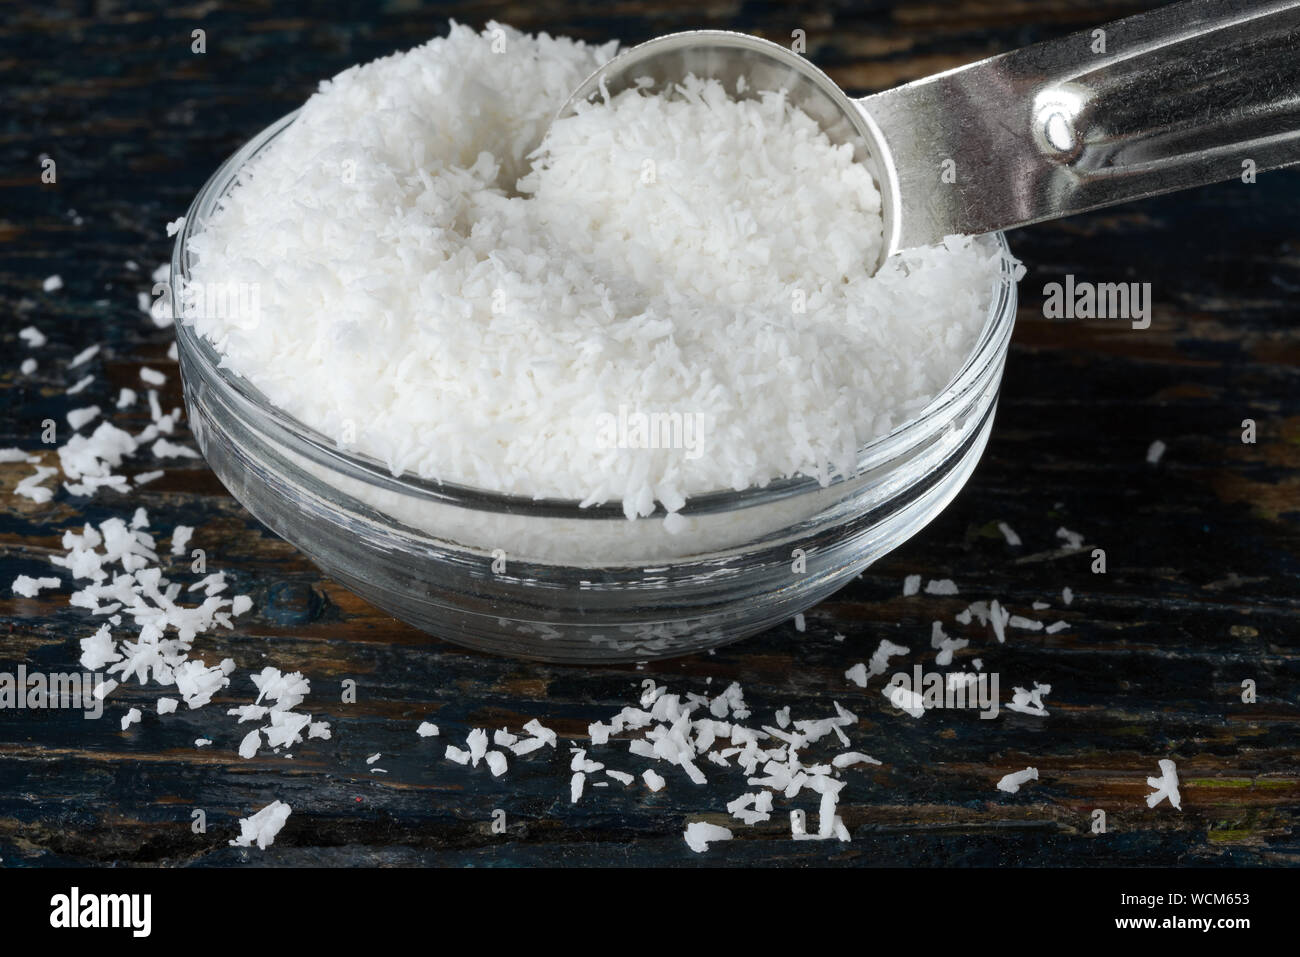 Shredded Coconut In Spoon By Bowl On Wooden Table Stock Photo